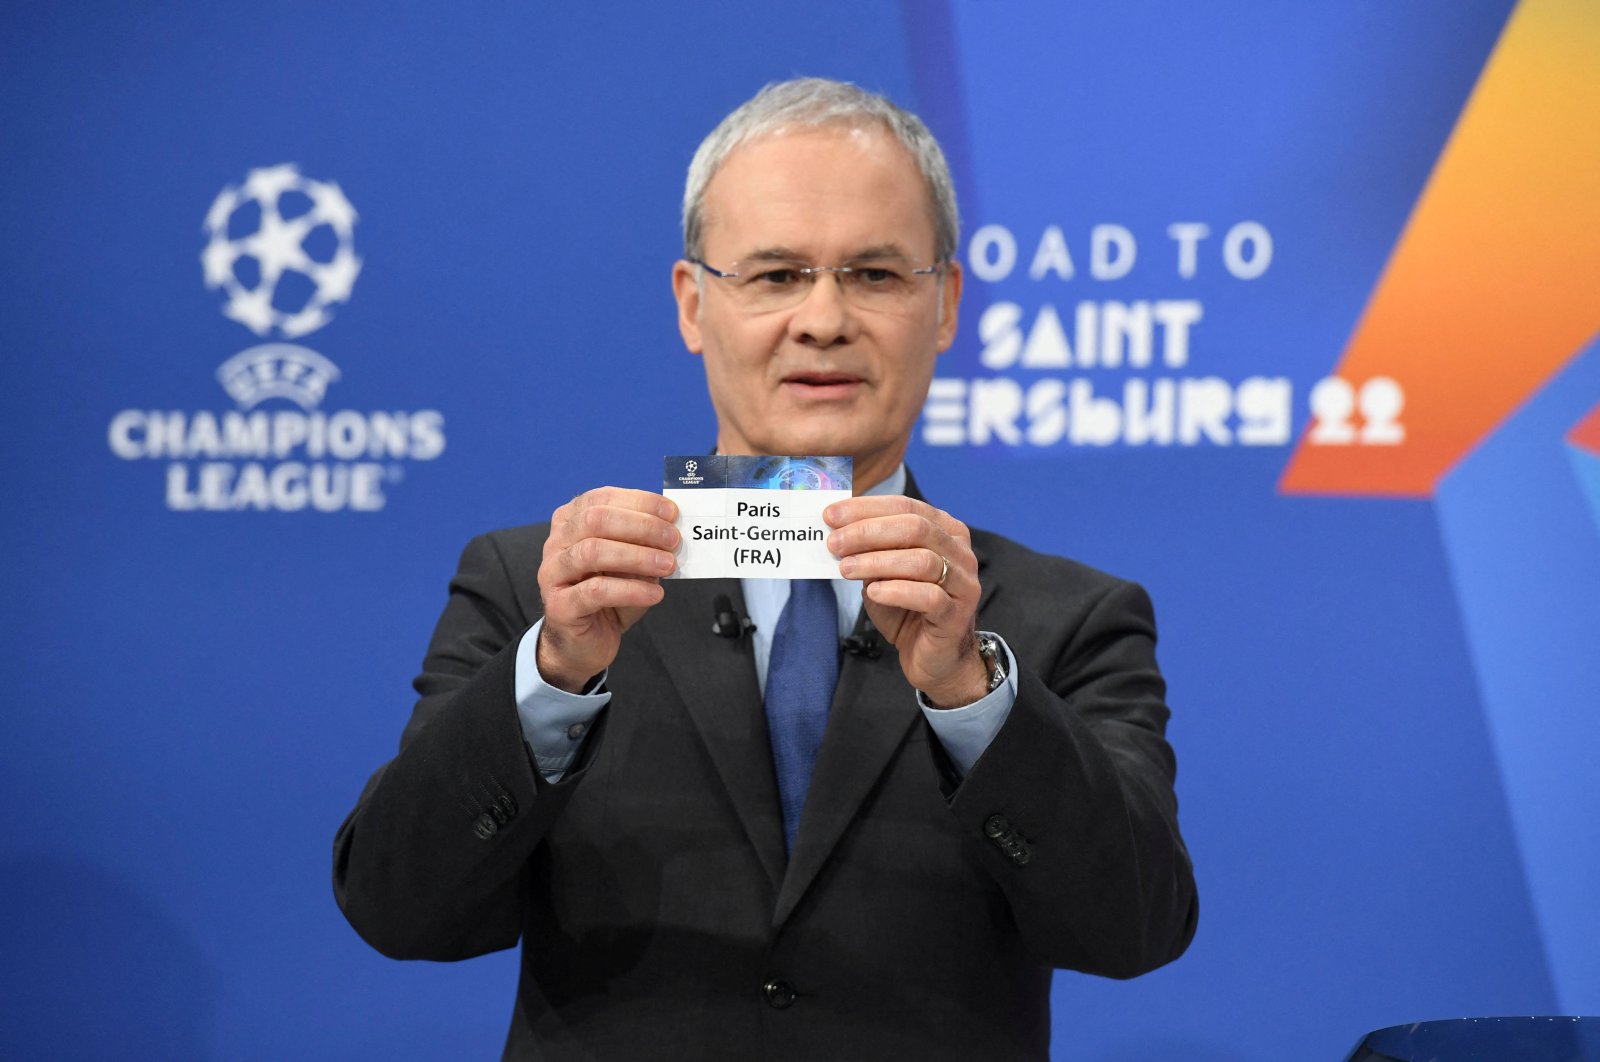 UEFA Deputy General Secretary Giorgio Marchetti draws out the card of Paris Saint-Germain during the UEFA Champions League 2021/22 Round of 16 Draw at the UEFA headquarters, Nyon, Switzerland, Dec. 13, 2021. (Reuters Photo)